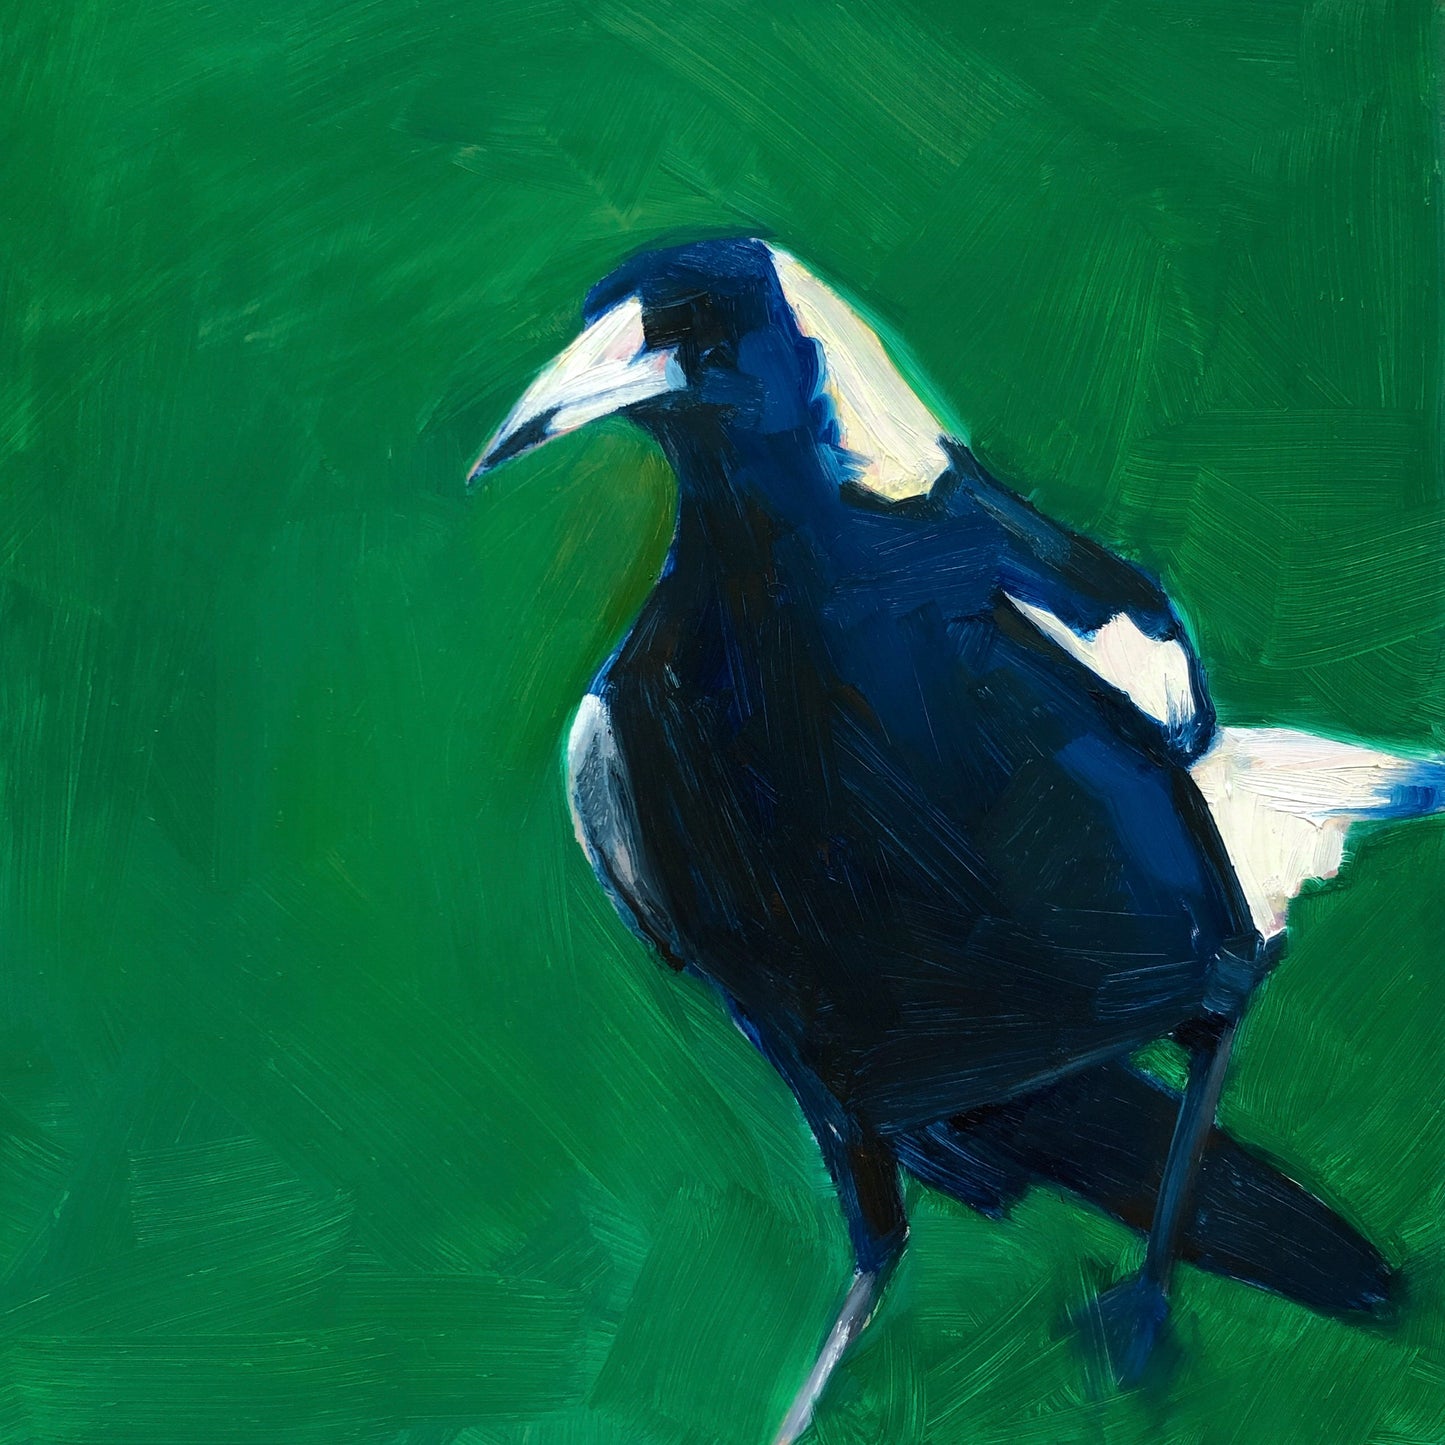 original oil painting of a navy blue magpie on an emerald green background